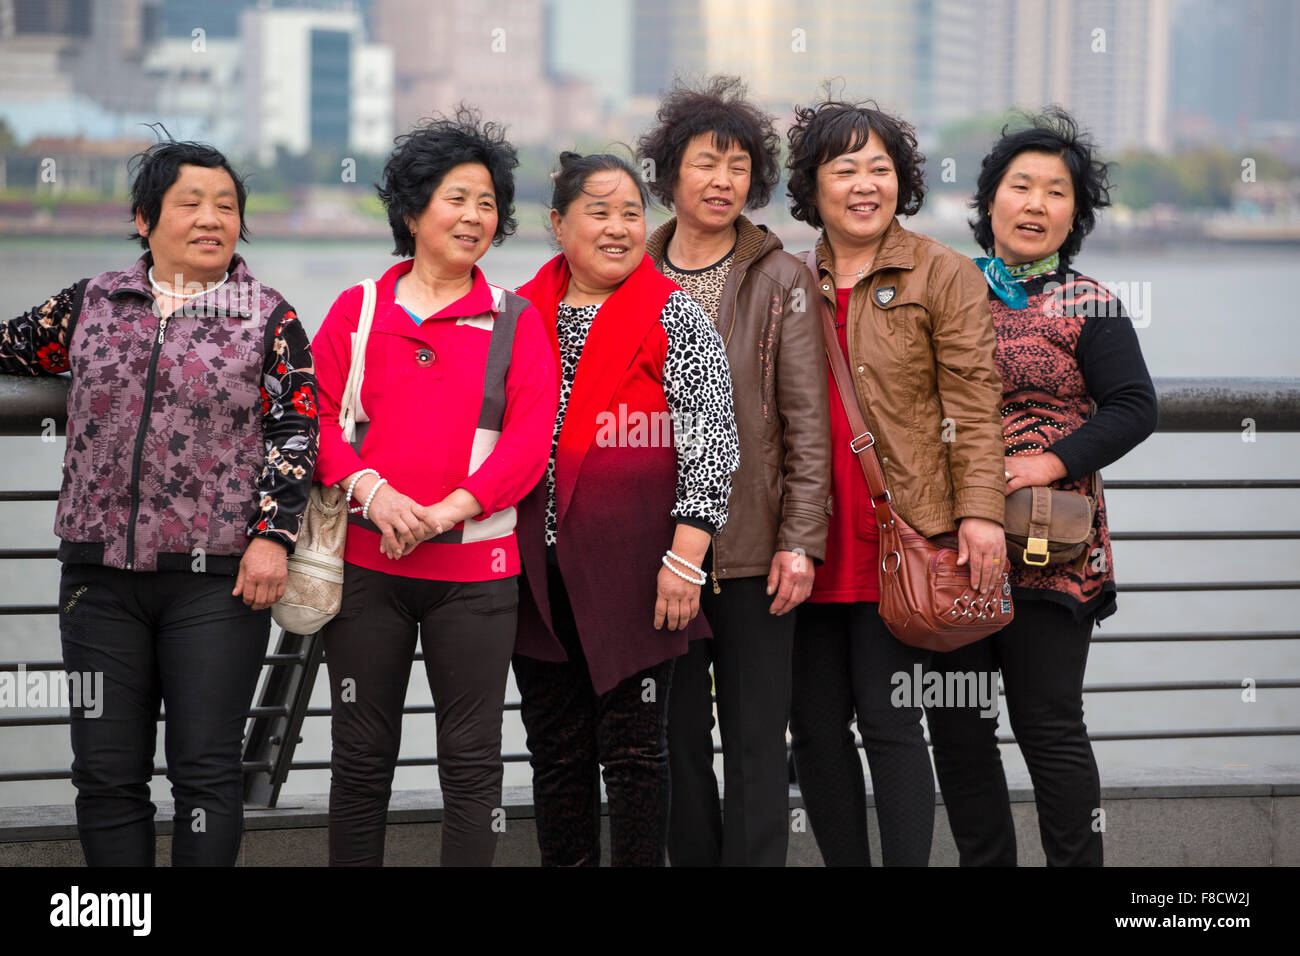 Group of women smiling and being taken in photo Stock Photo